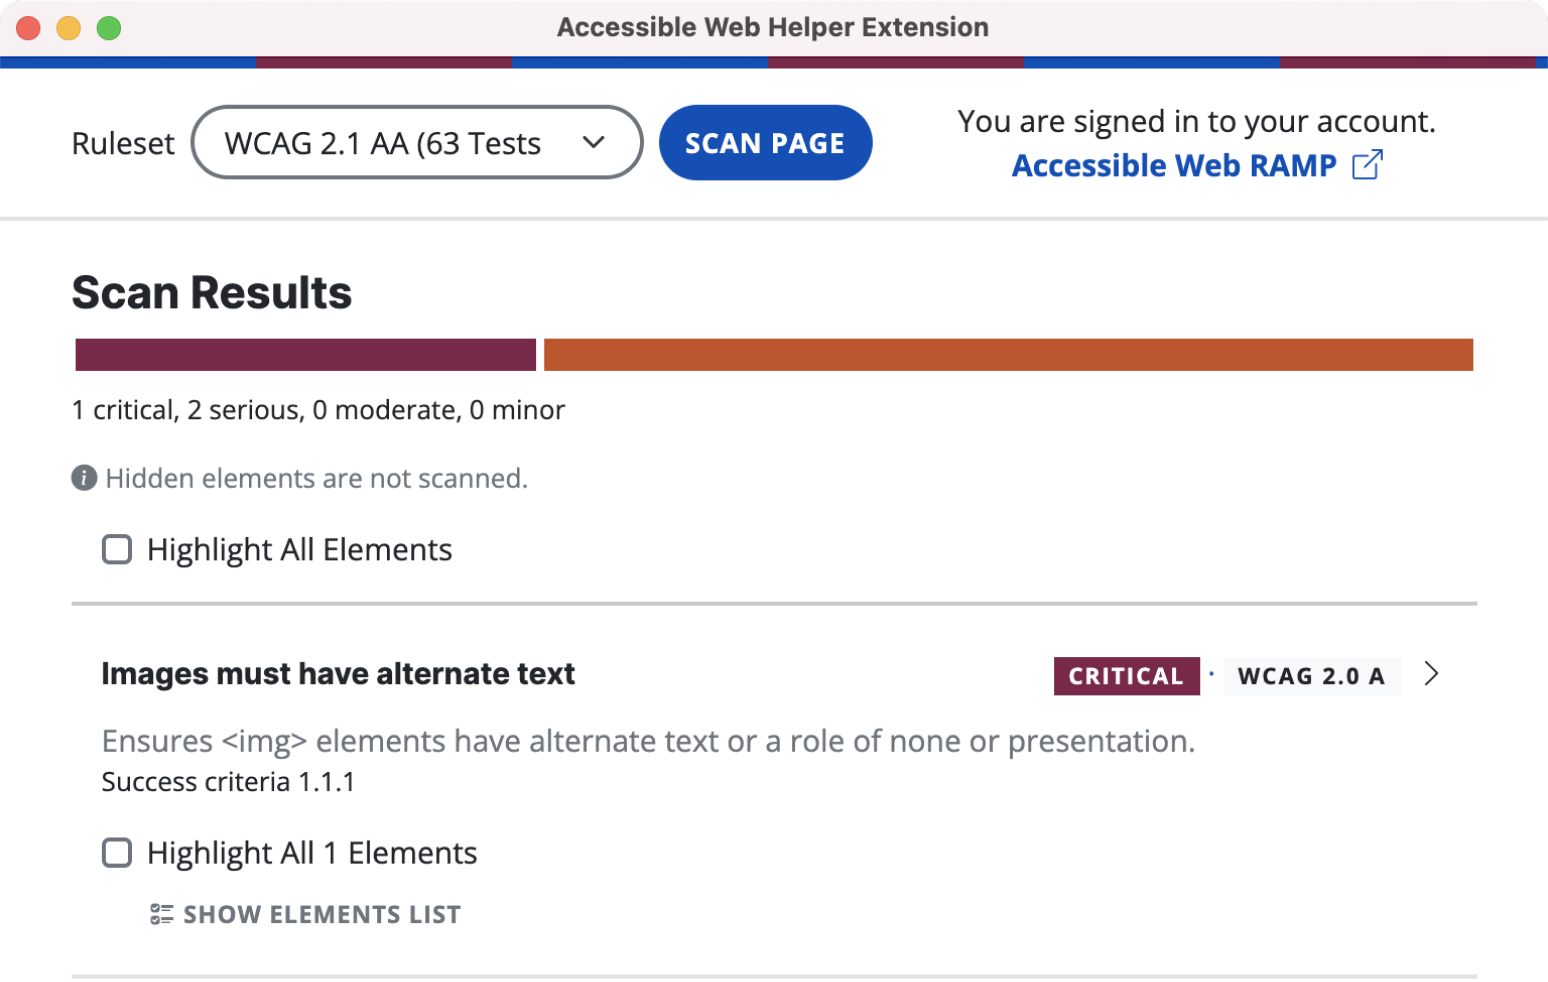 a screenshot of accessible web helper extension showing the latest scan results.